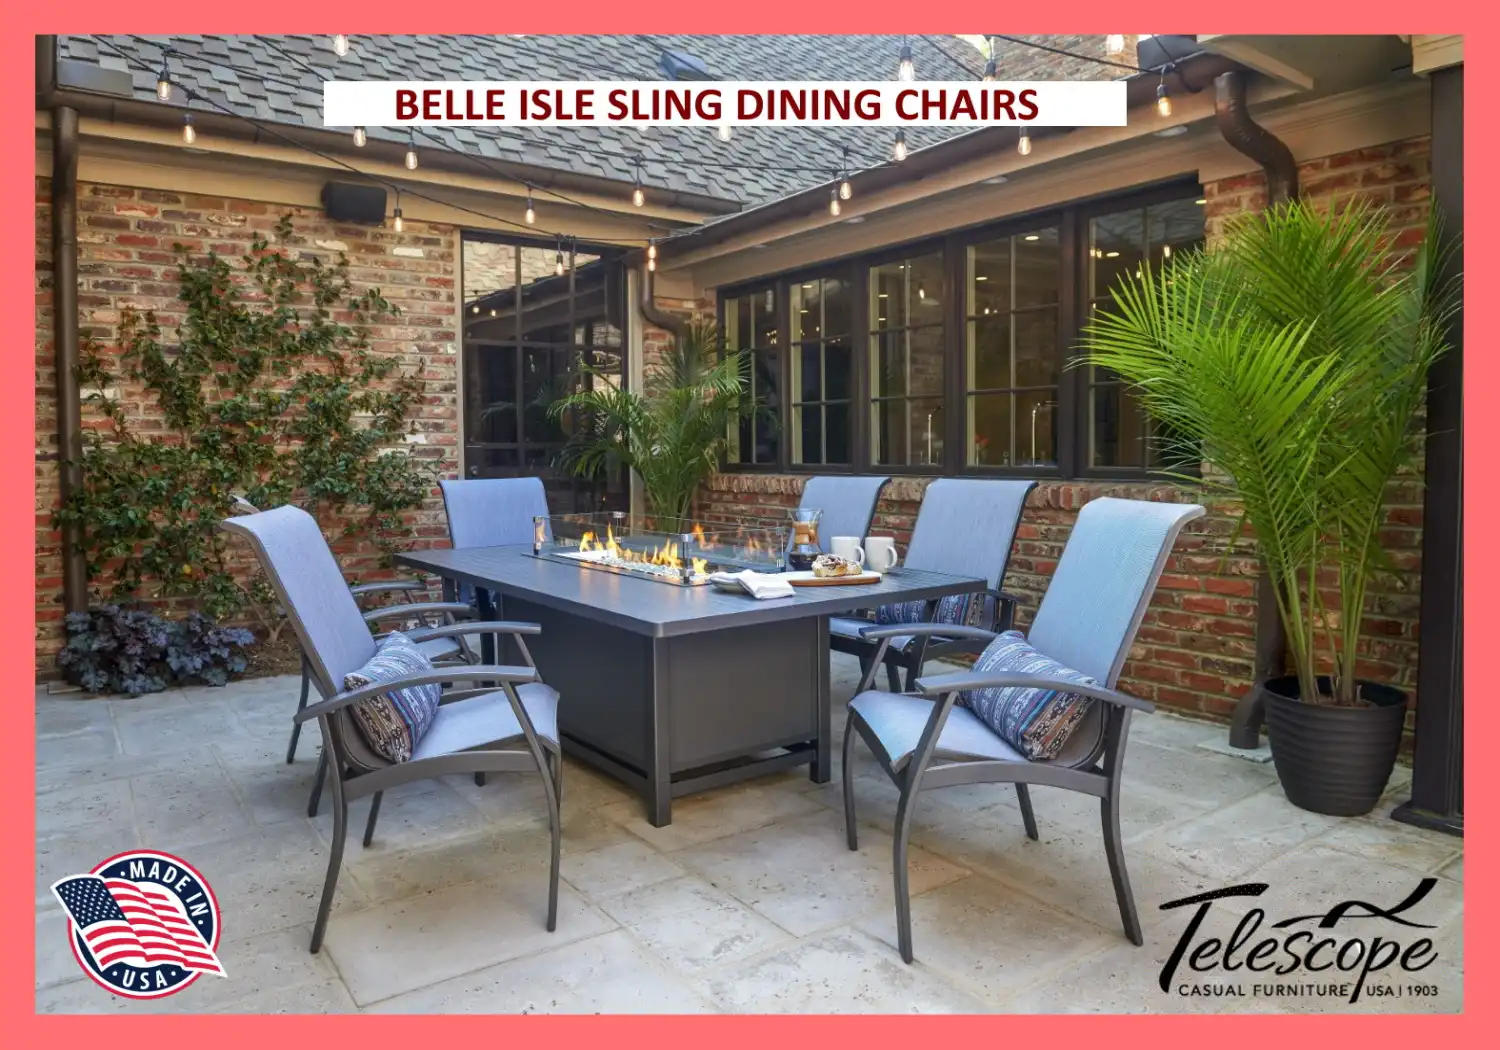 BELLE ISLE SLING DINING CHAIRS